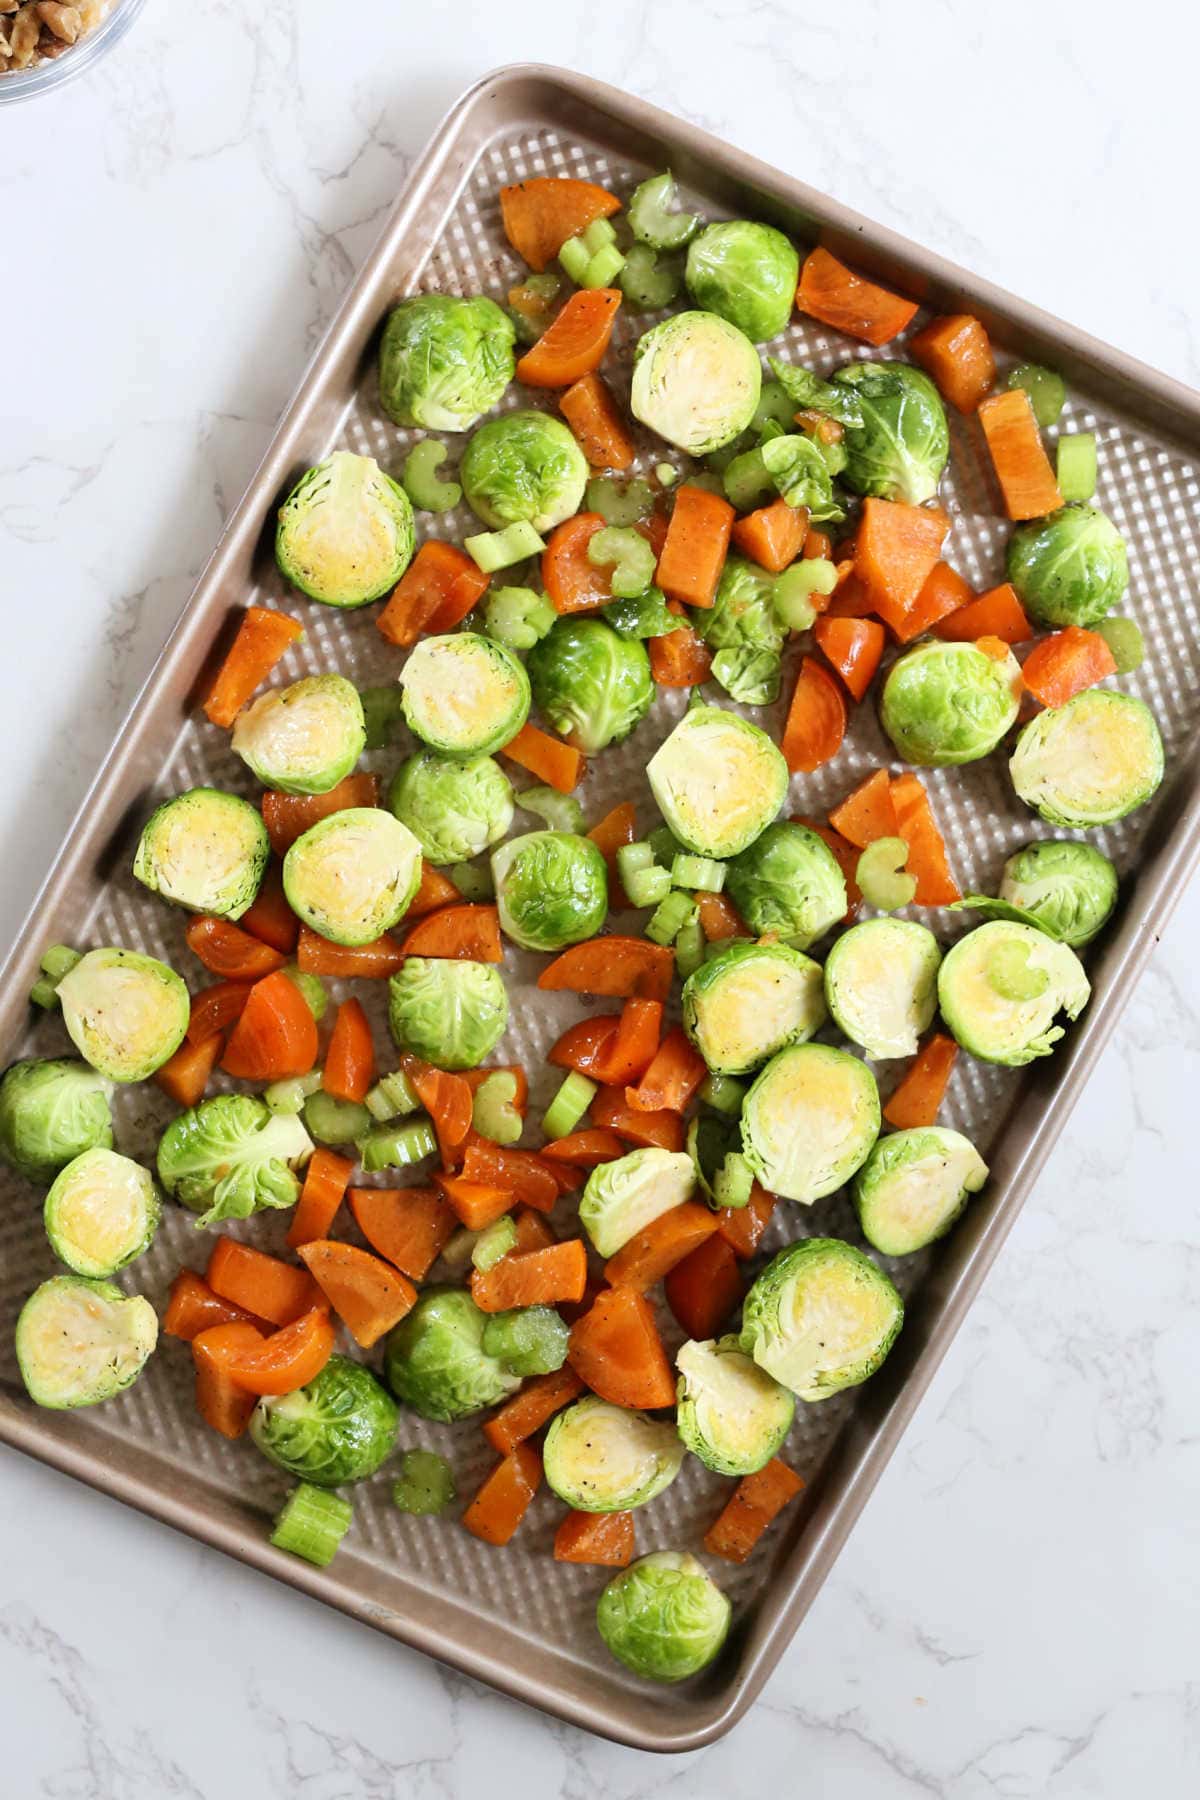 brussels sprouts persimmons and celery on a baking sheet for roasting